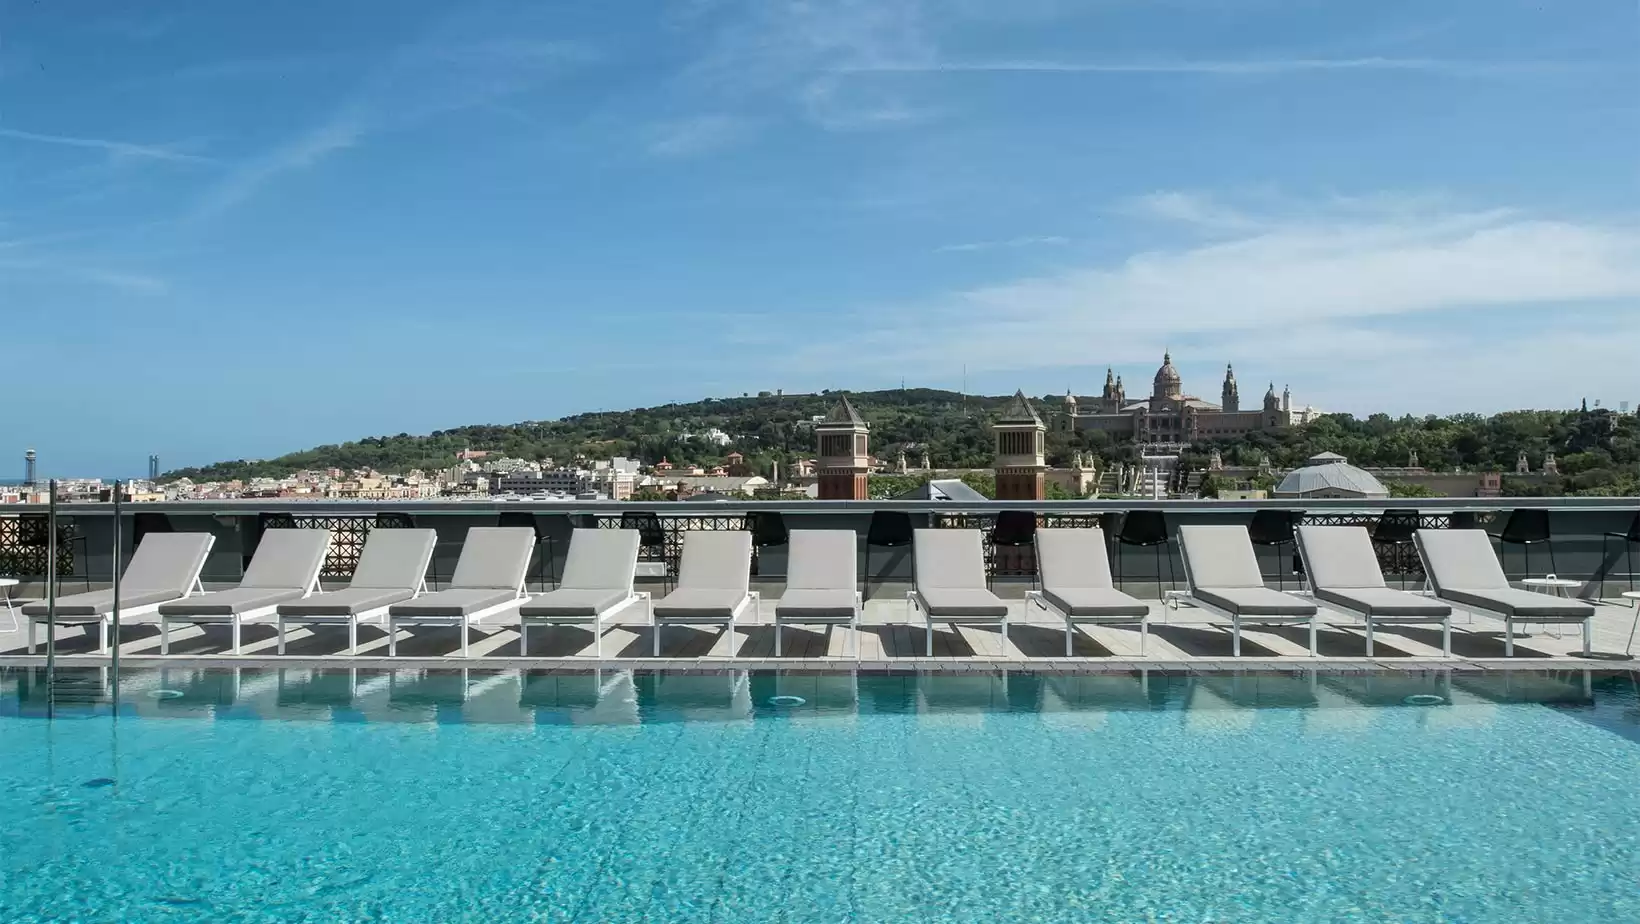 Catalonia Barcelona Plaza Hotel - OFFICIAL WEBSITE pic